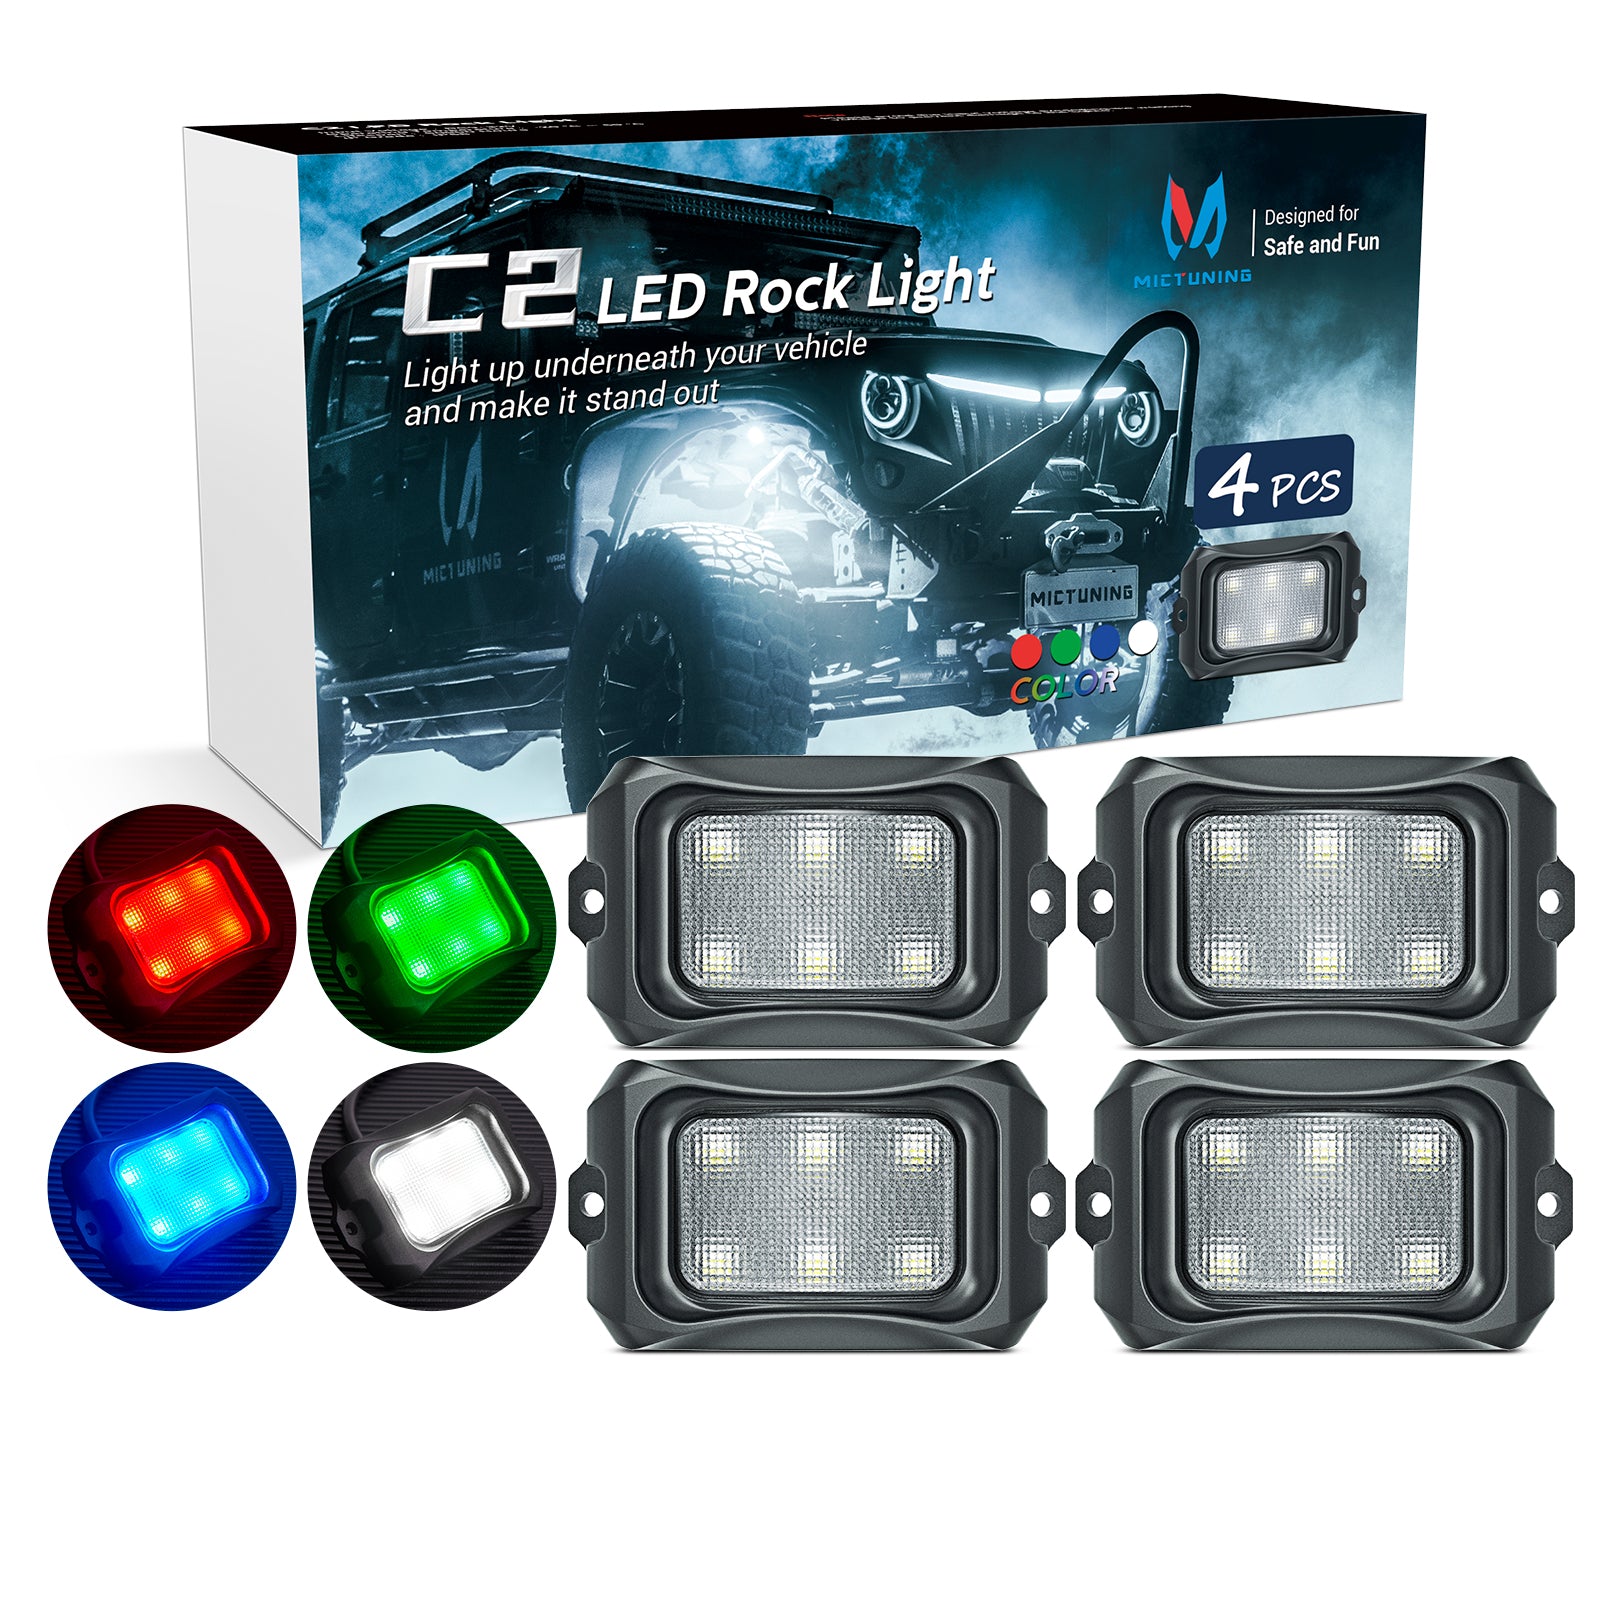 C2 Curved LED Rock Light Pure Sigle Color 4 Pods Waterproof LED Underglow Light